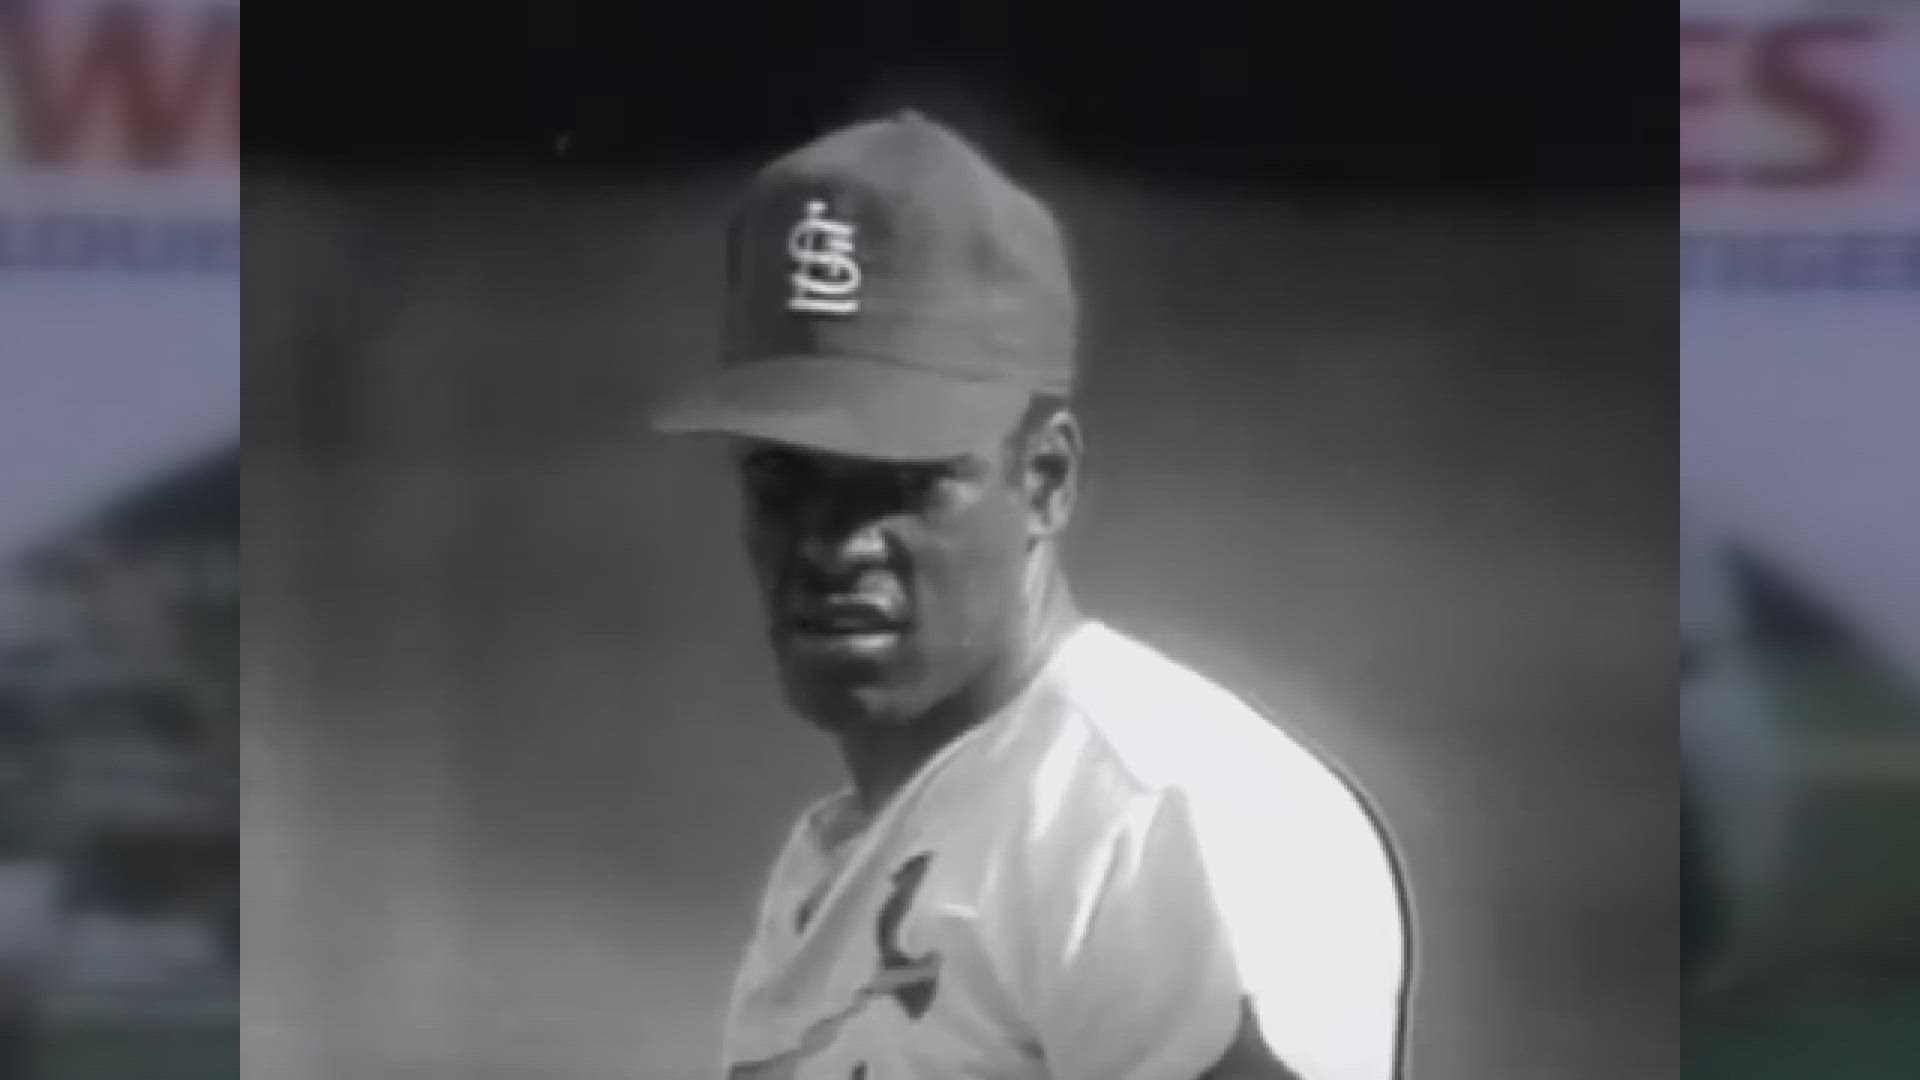 Bob Gibson was so dominant in 1968 that it was hard to imagine he lost nine games that season. And he did it in an America rocked by death, turmoil and protest.